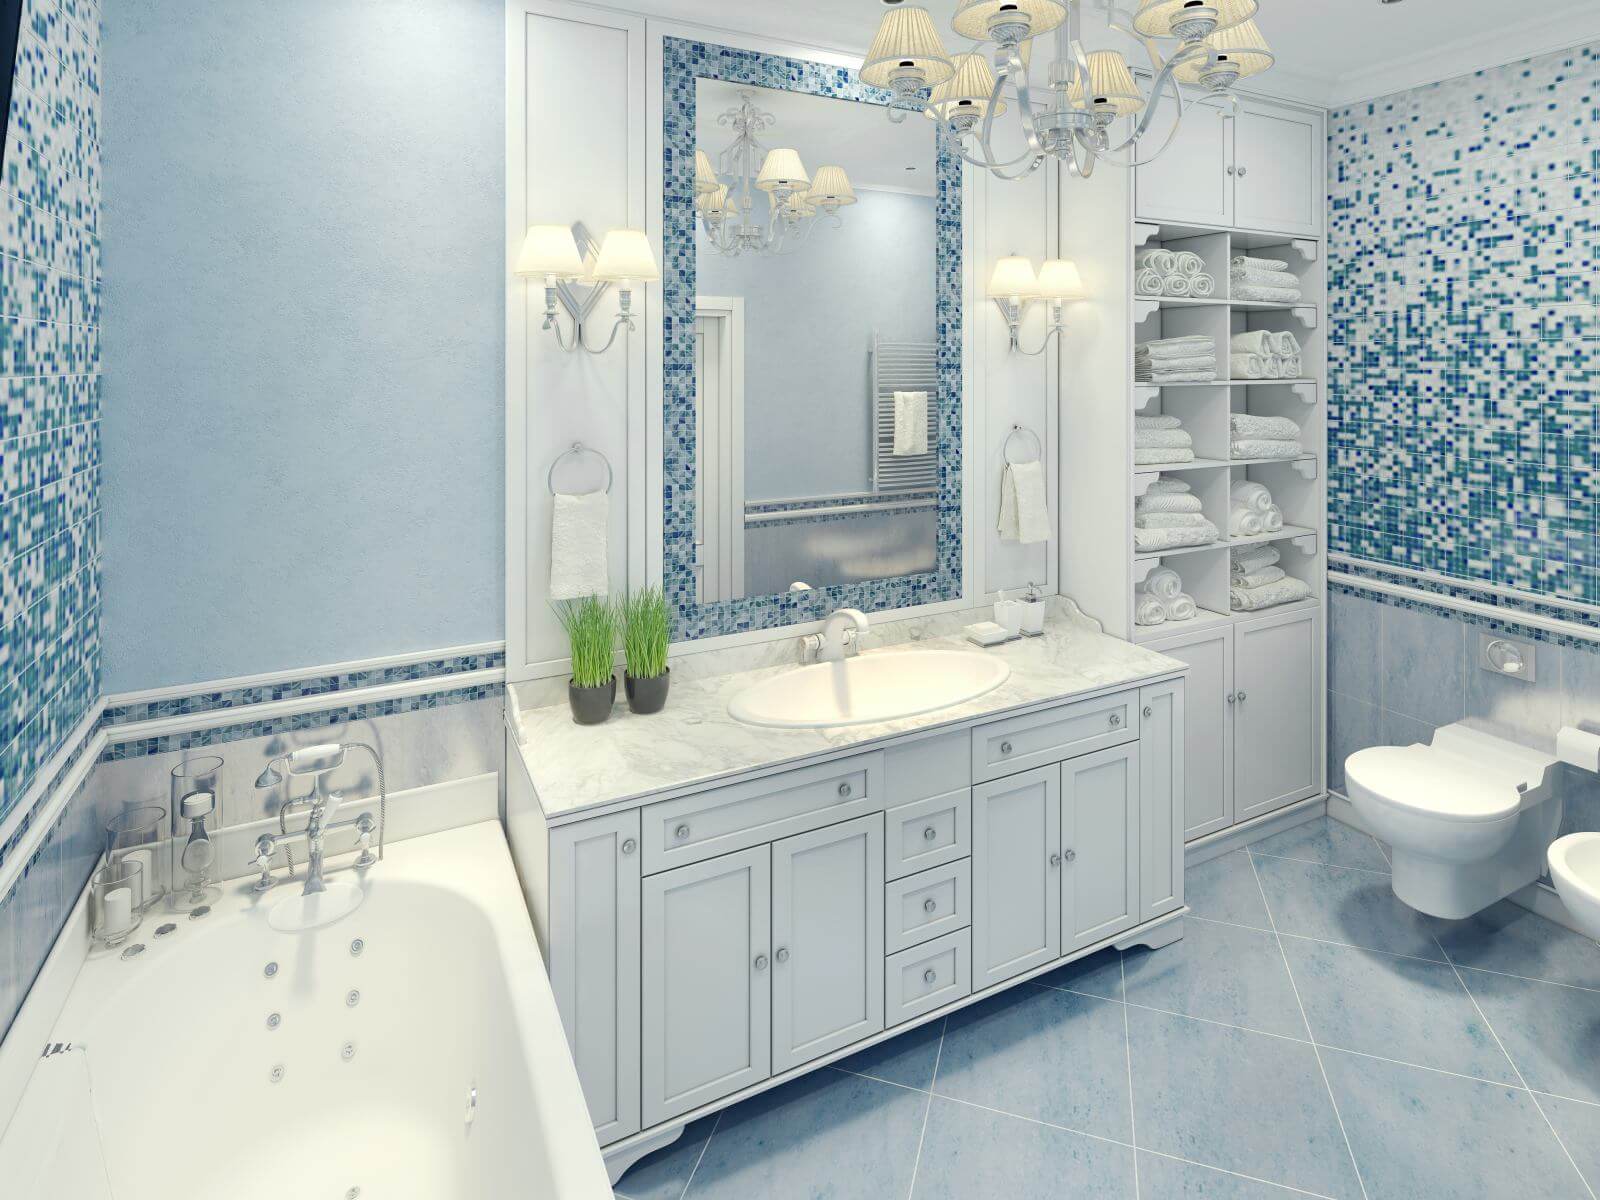 Bright art deco bathroom interior. The spacious bathroom with white furniture and fragments of mosaic wall. 3D render